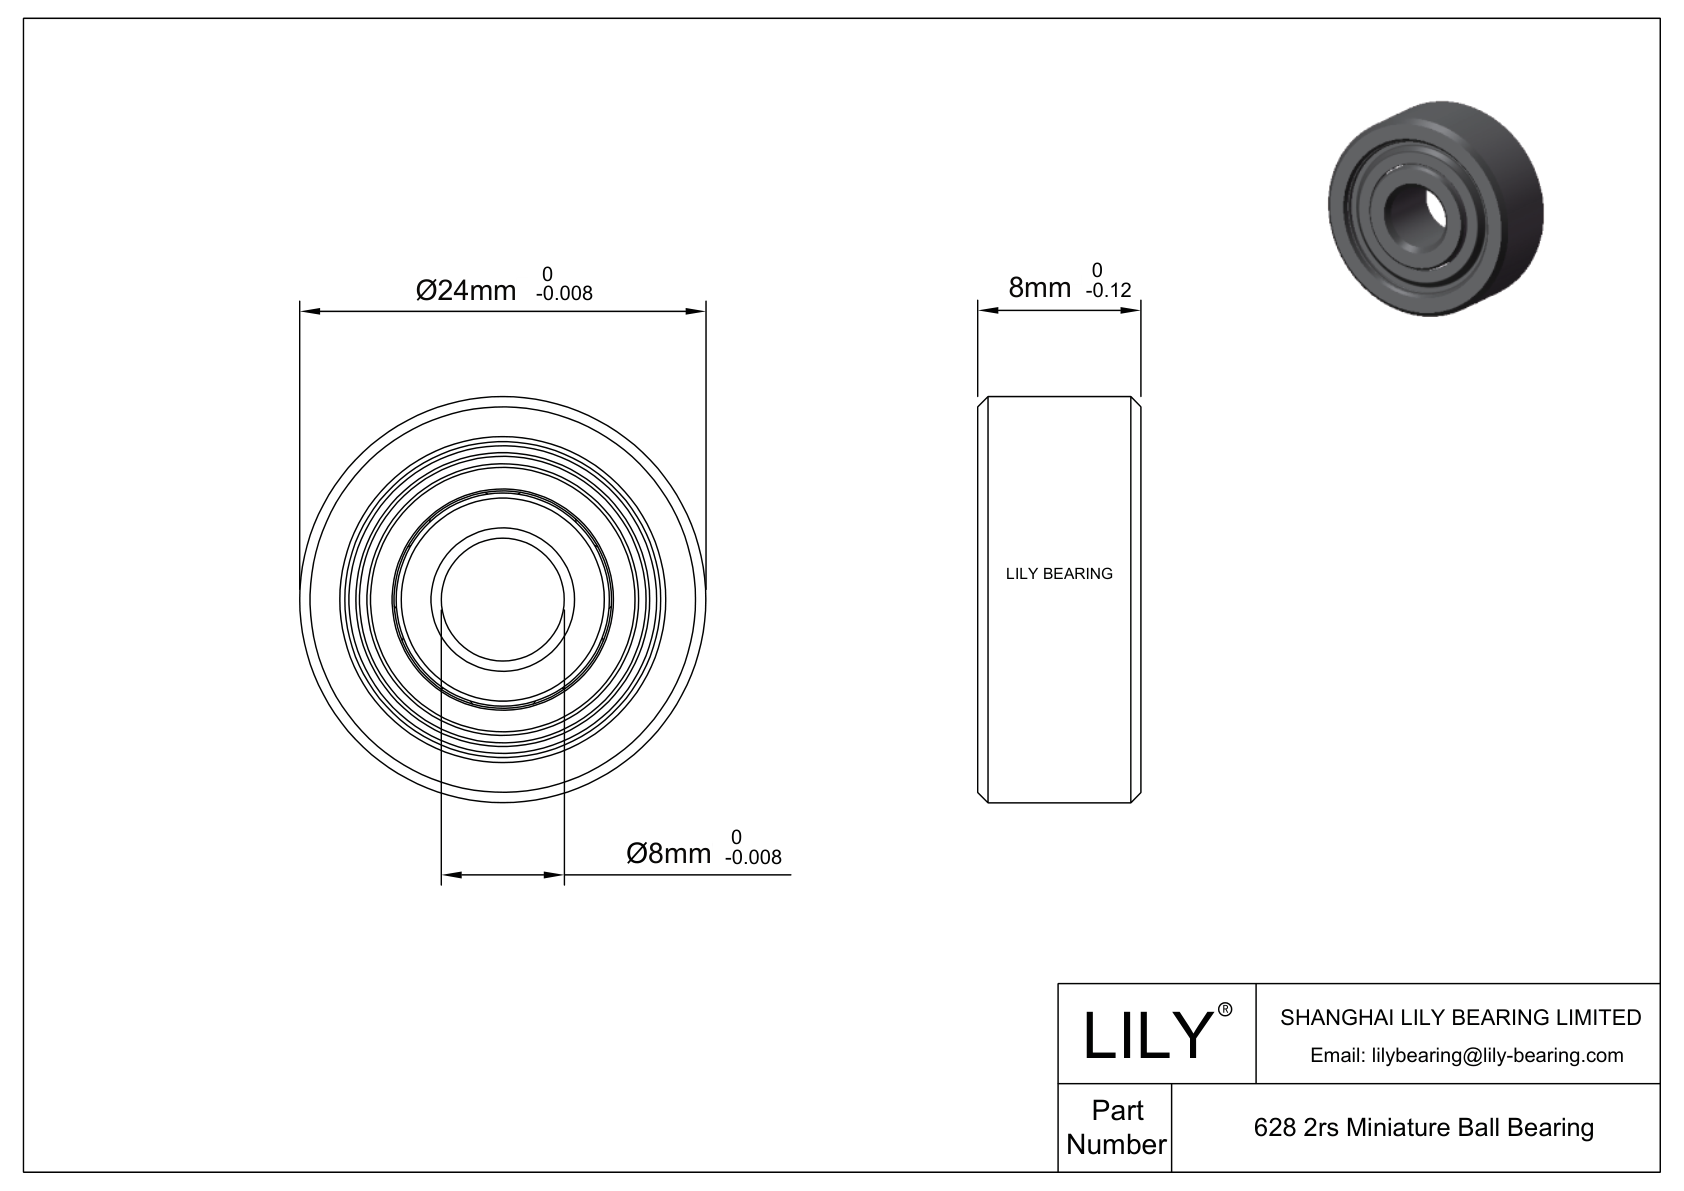 LILY-BS62845-8 POM Coated Bearing cad drawing